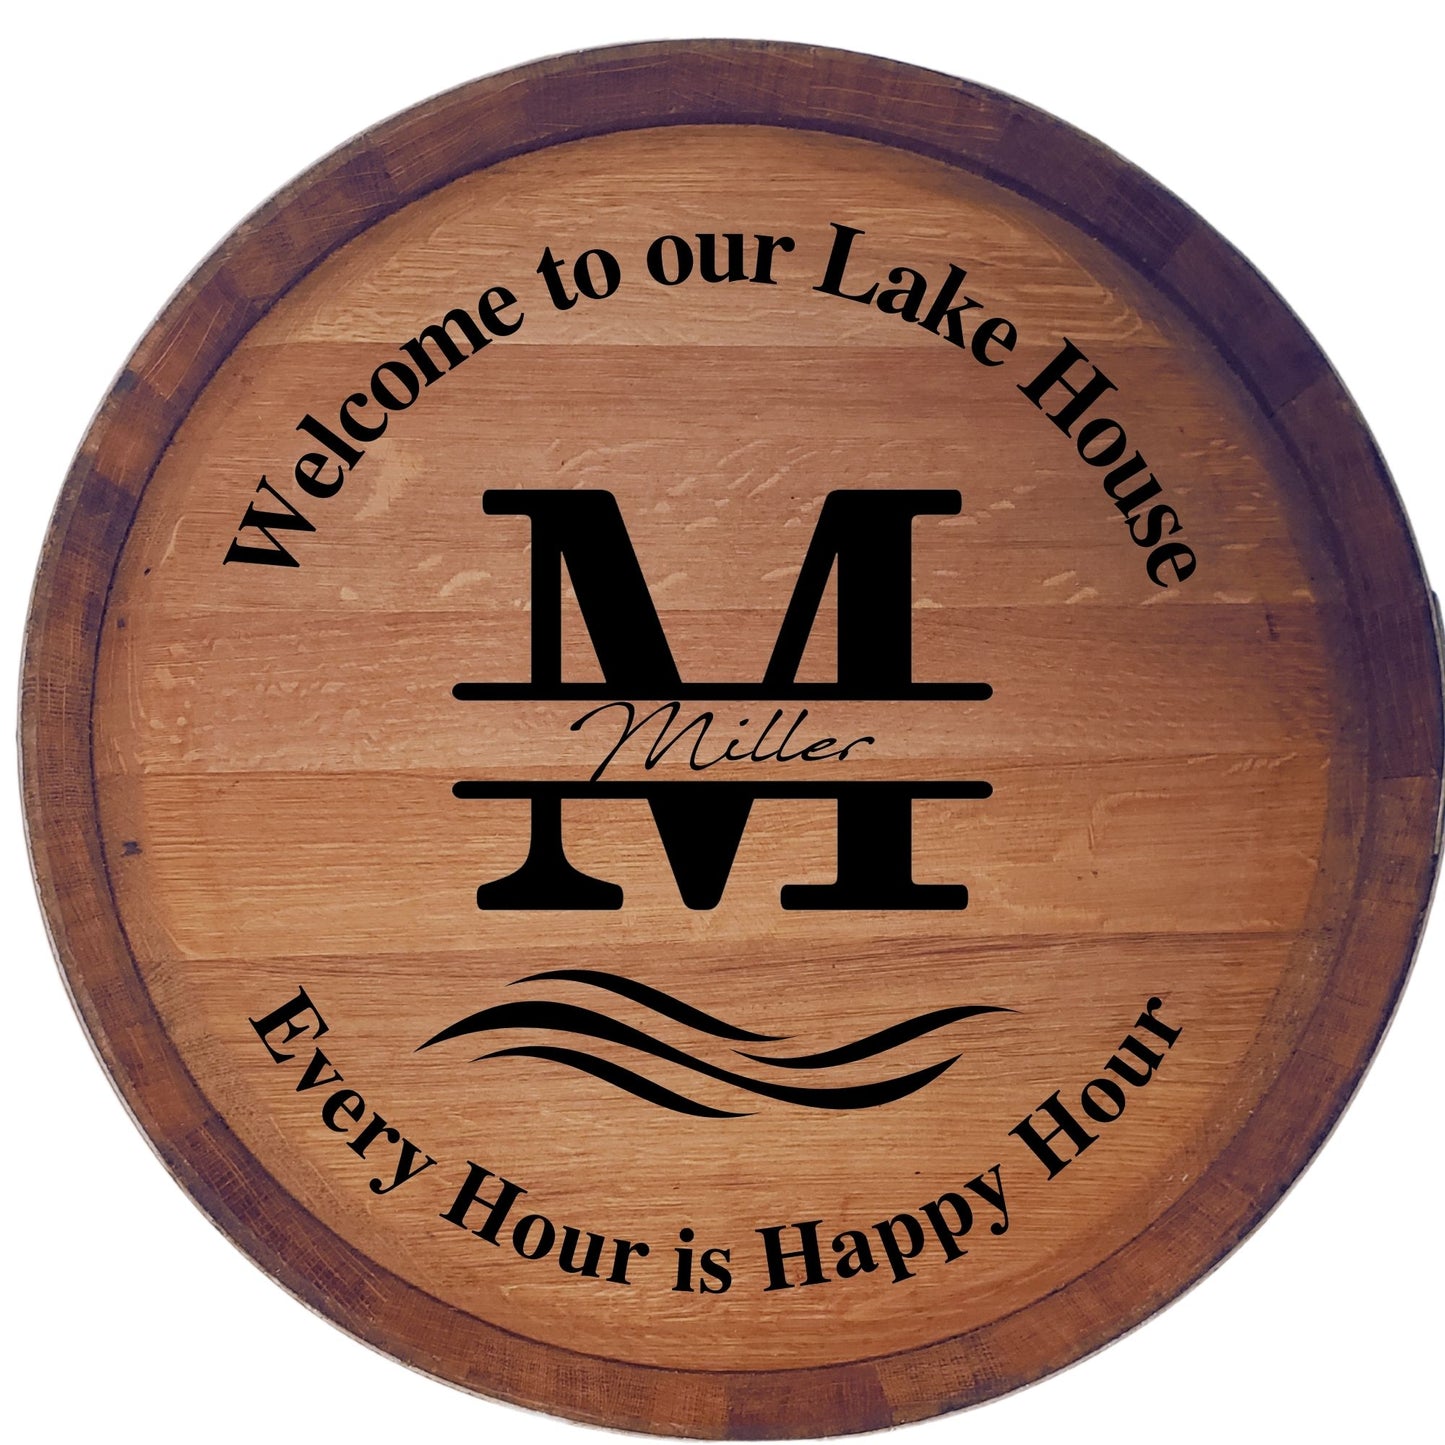 Personalized Laser Engraving Services for Wine Barrel Lazy Susan or Wall Art Welcome to...